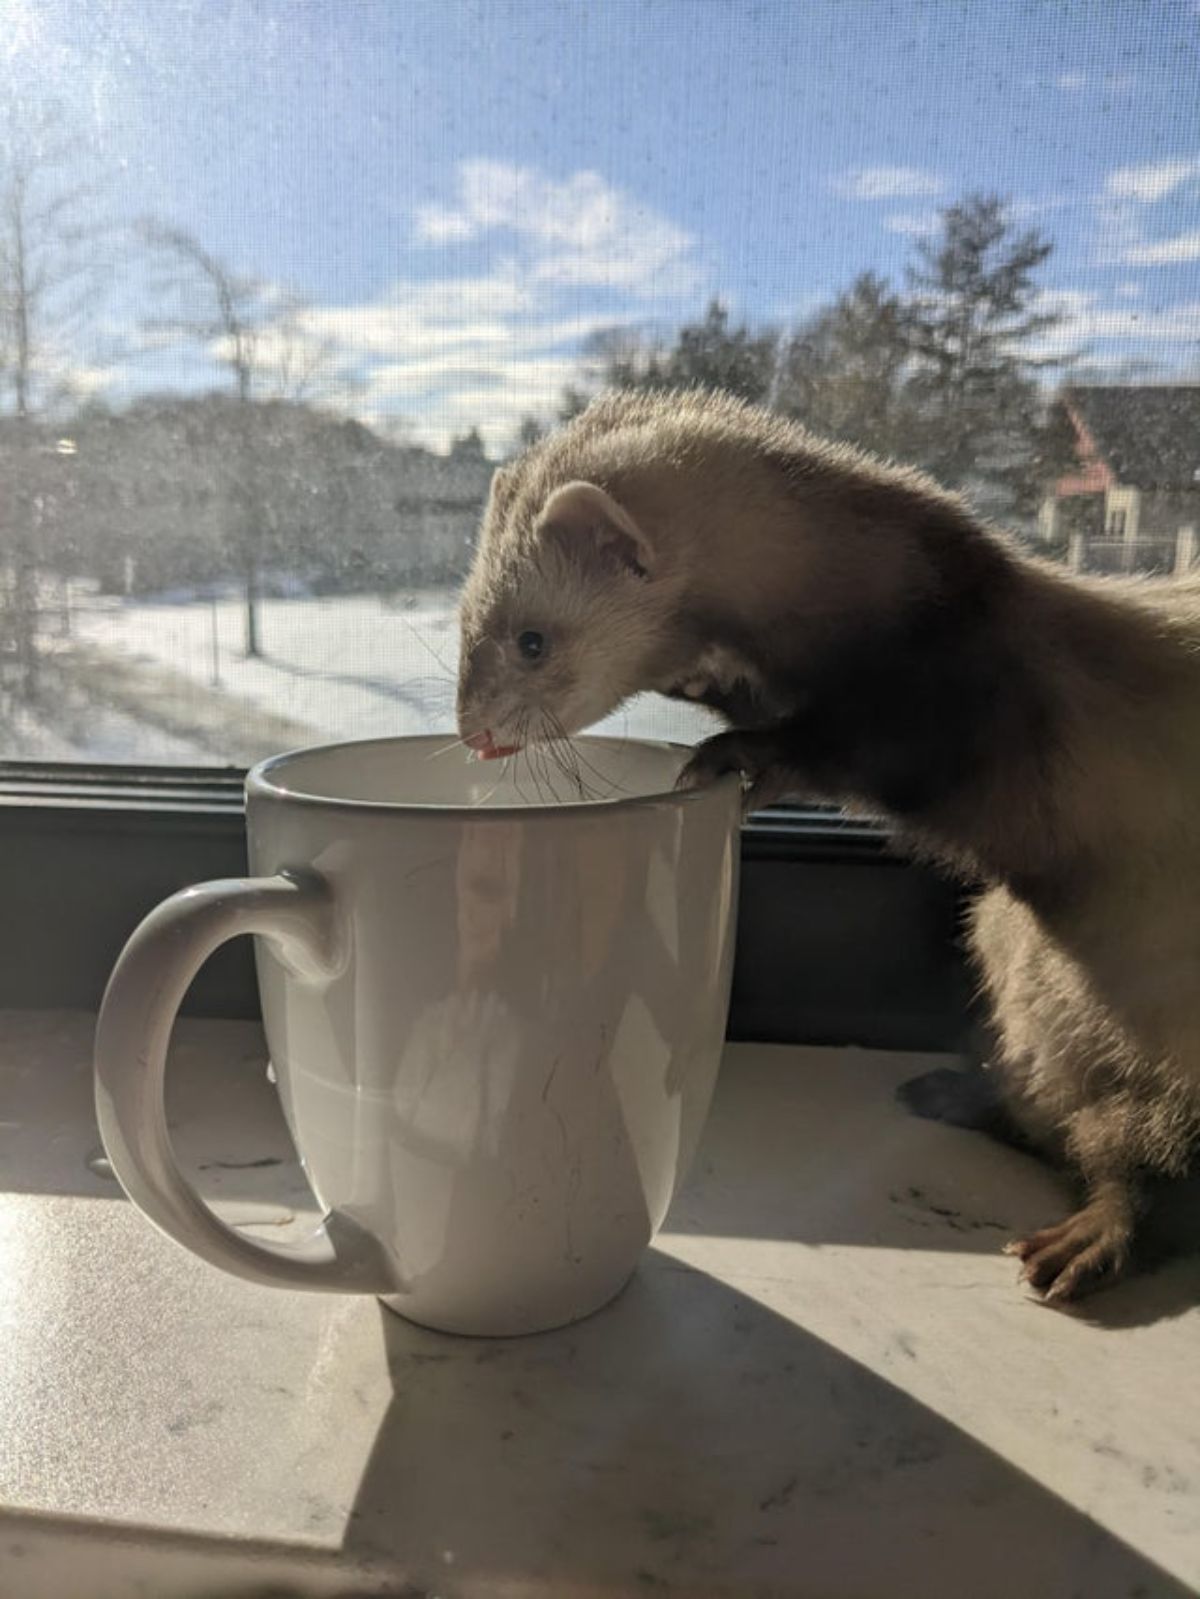 brown ferret standing on hind legs and reaching into a white mug on a windowsill drinking out of it